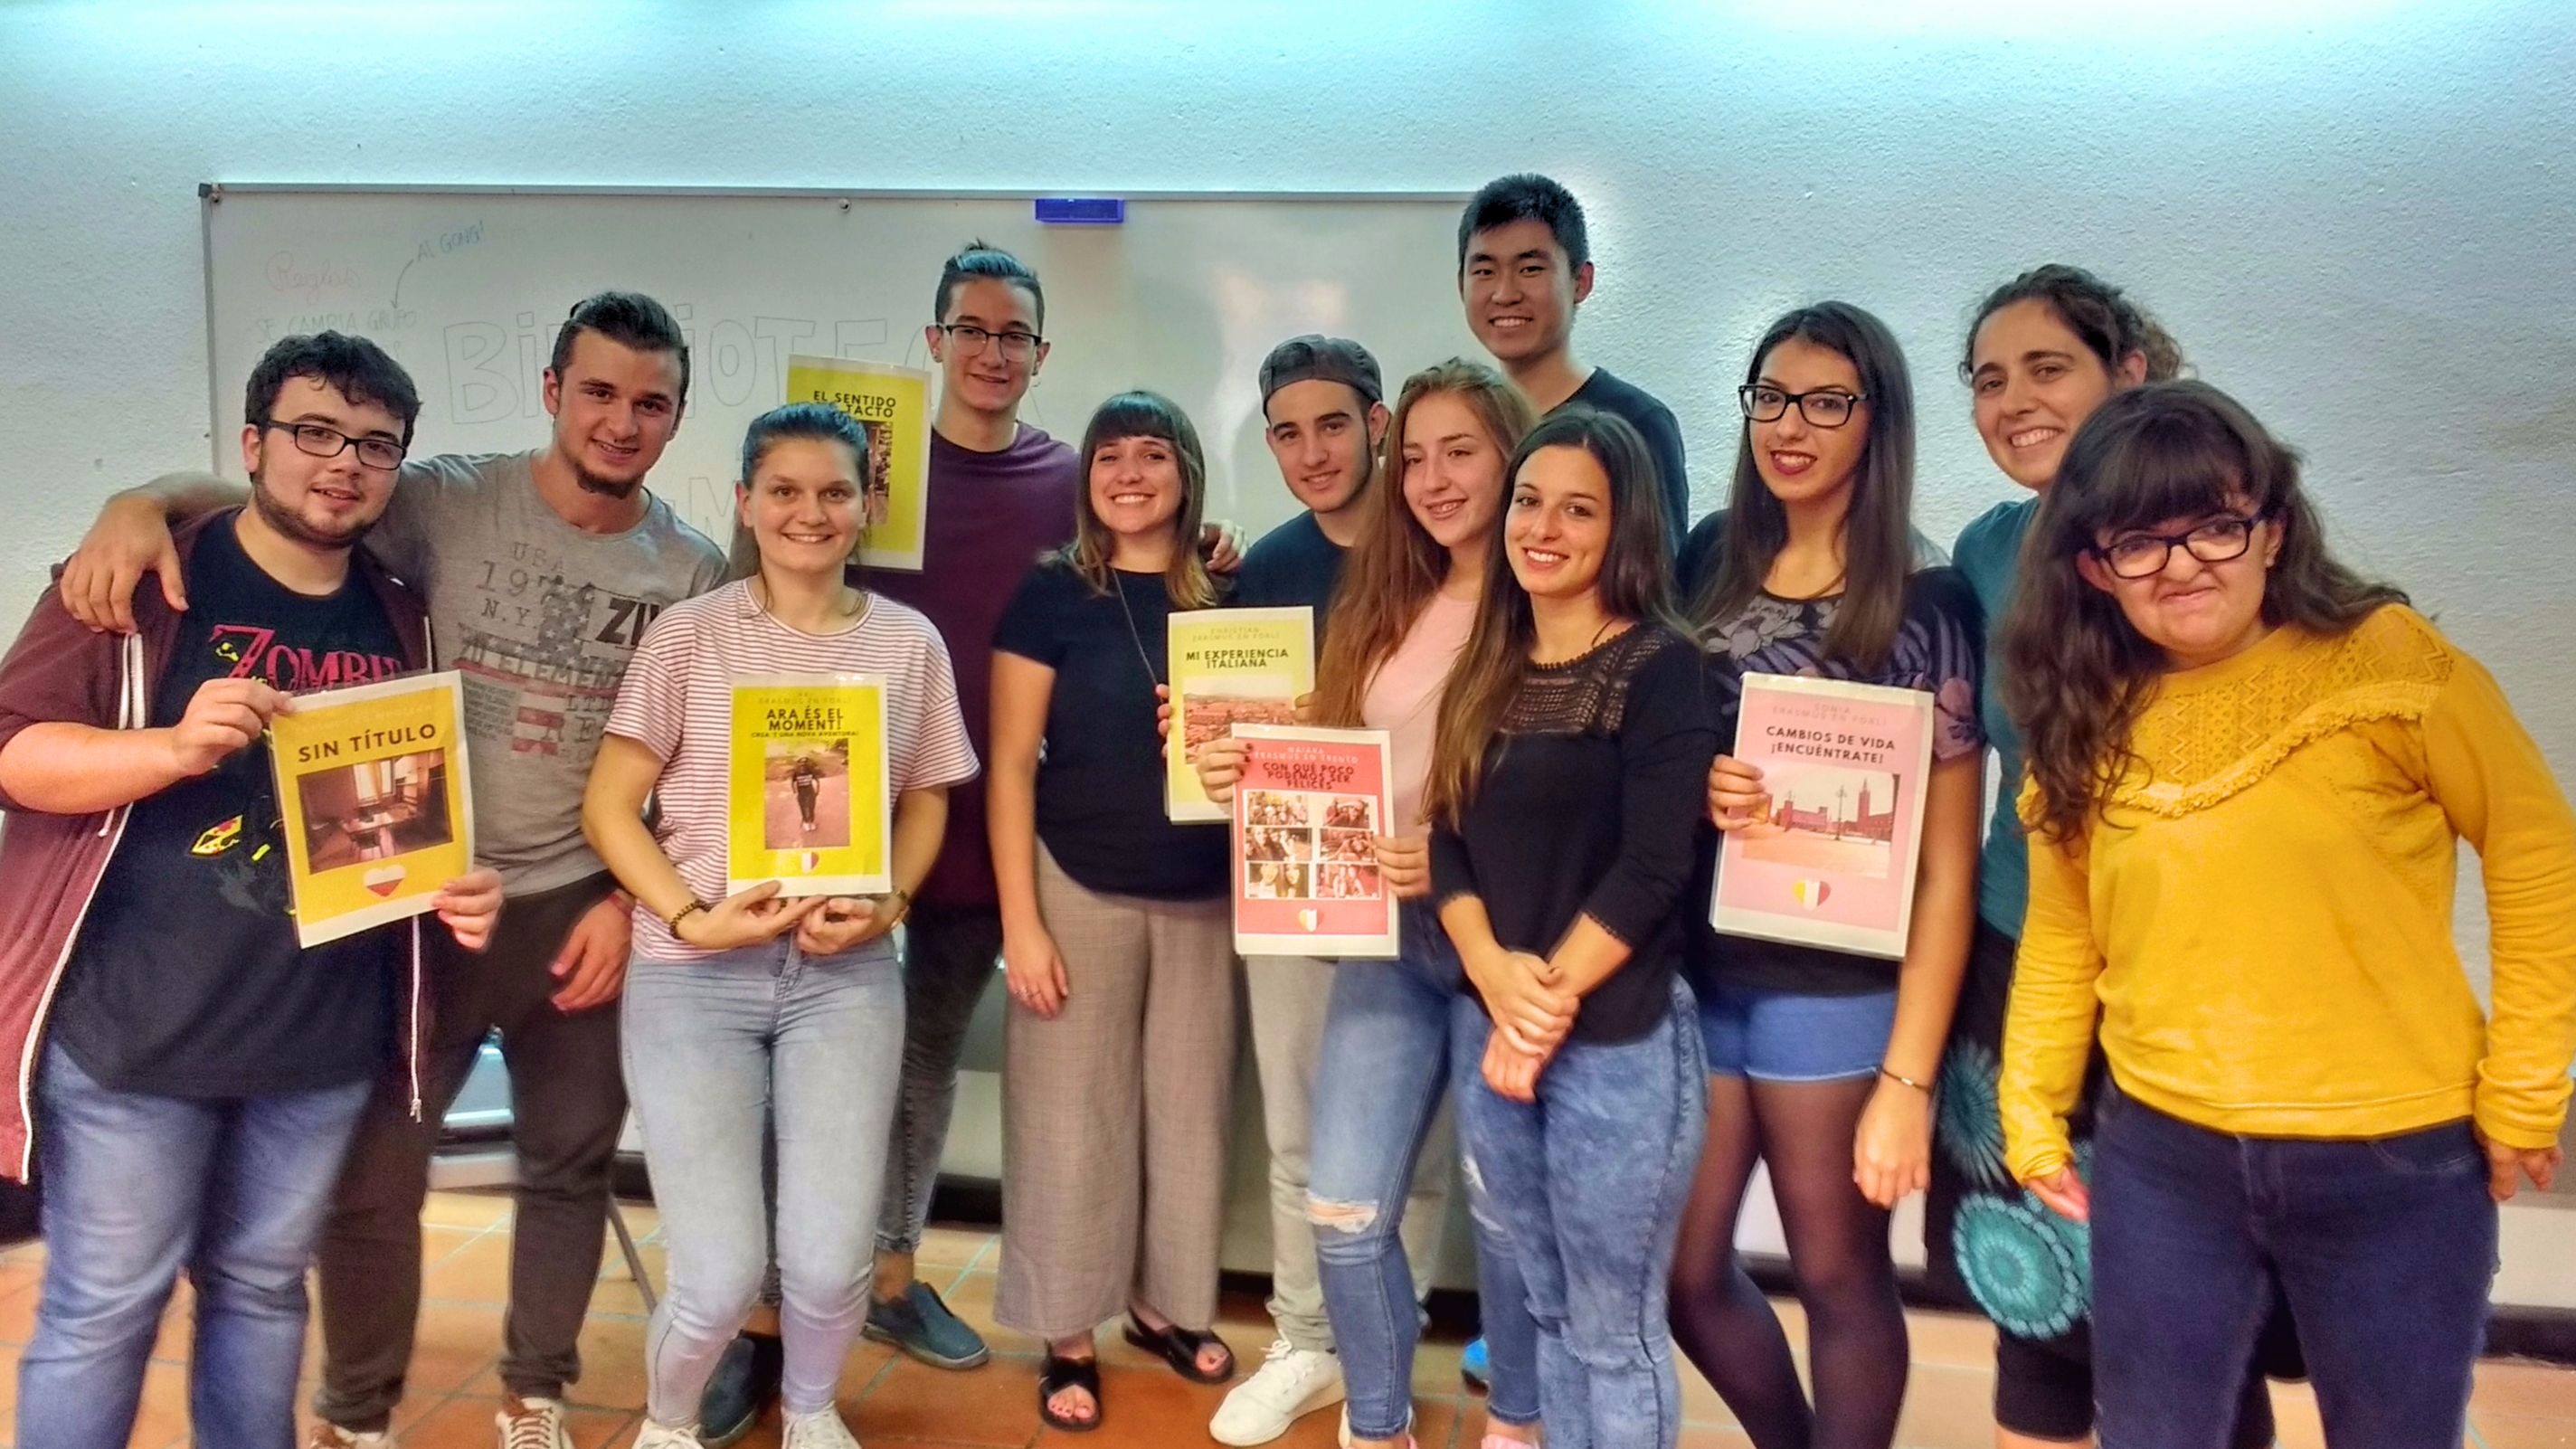 The Mundus Erasmus + Human Library brings together more than 50 young people